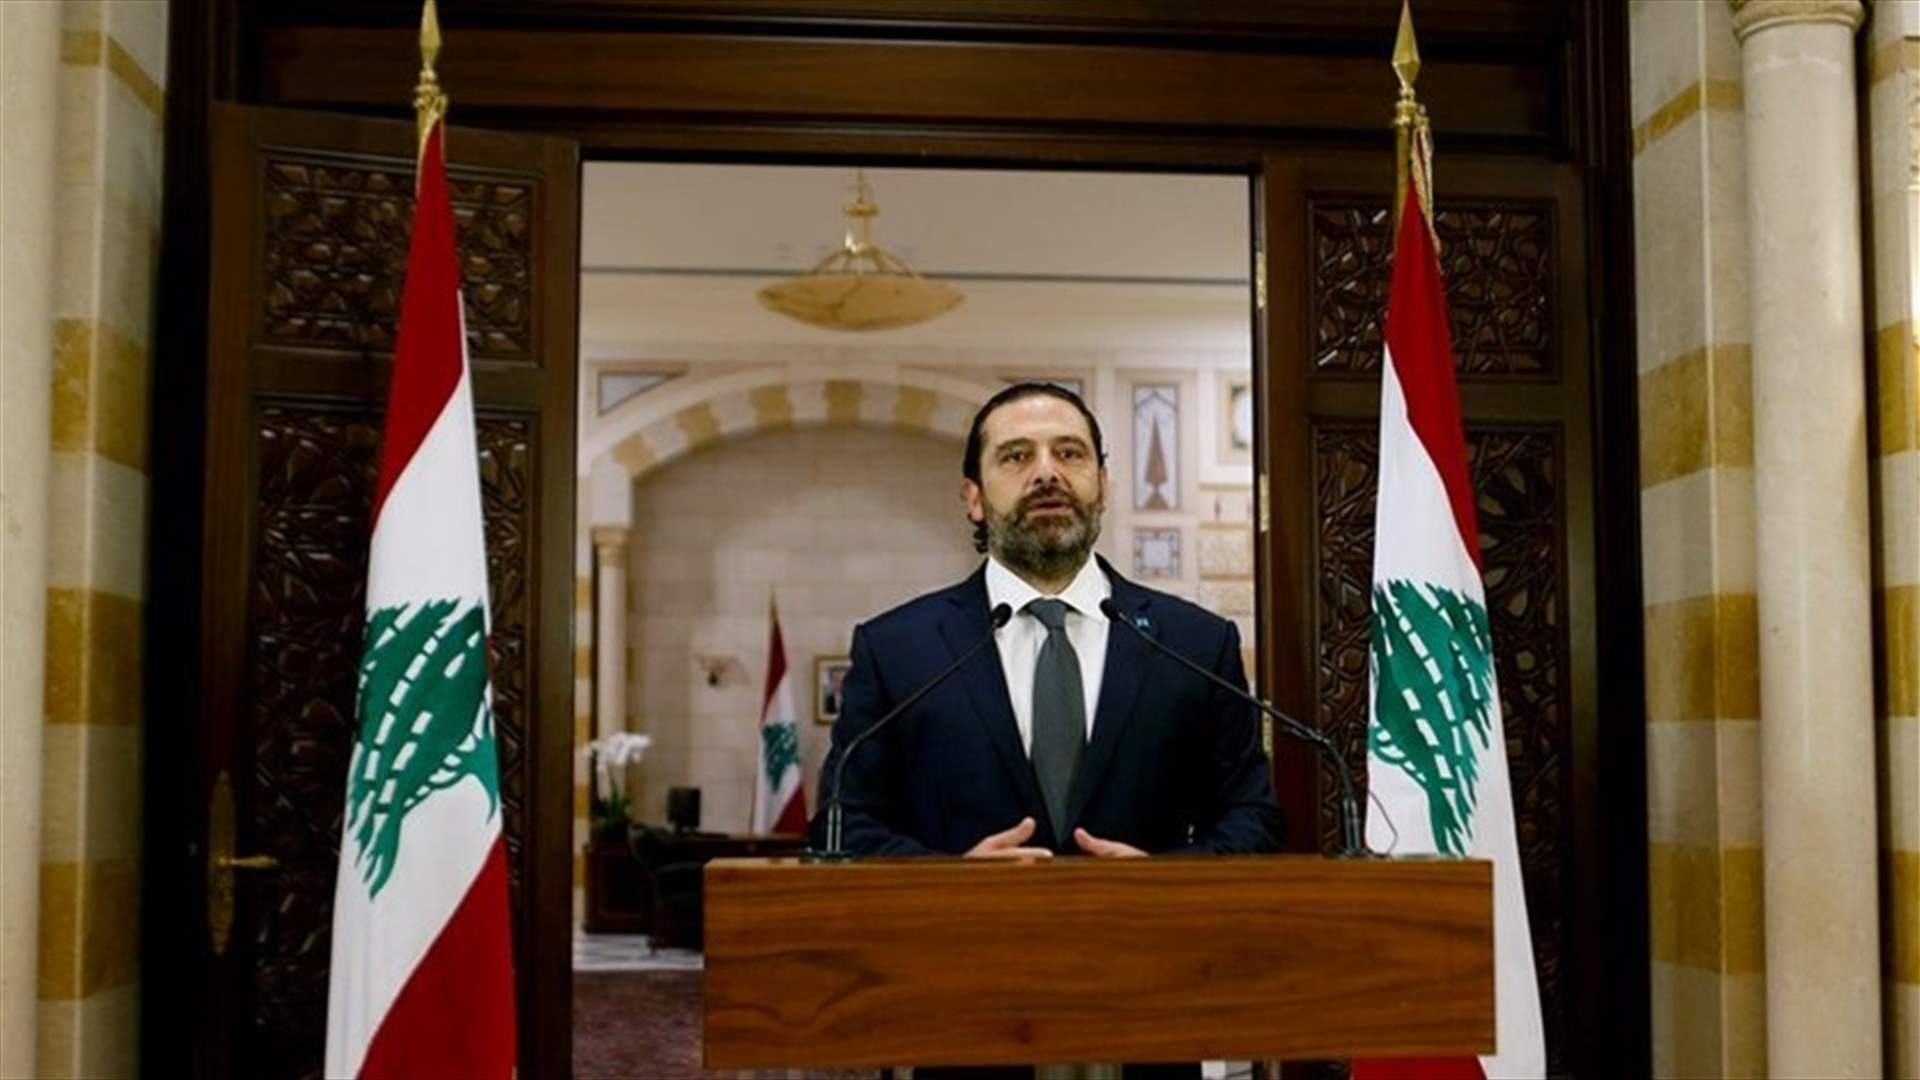 PM Hariri agrees reform package in bid to resolve economic crisis -official sources tell Reuters